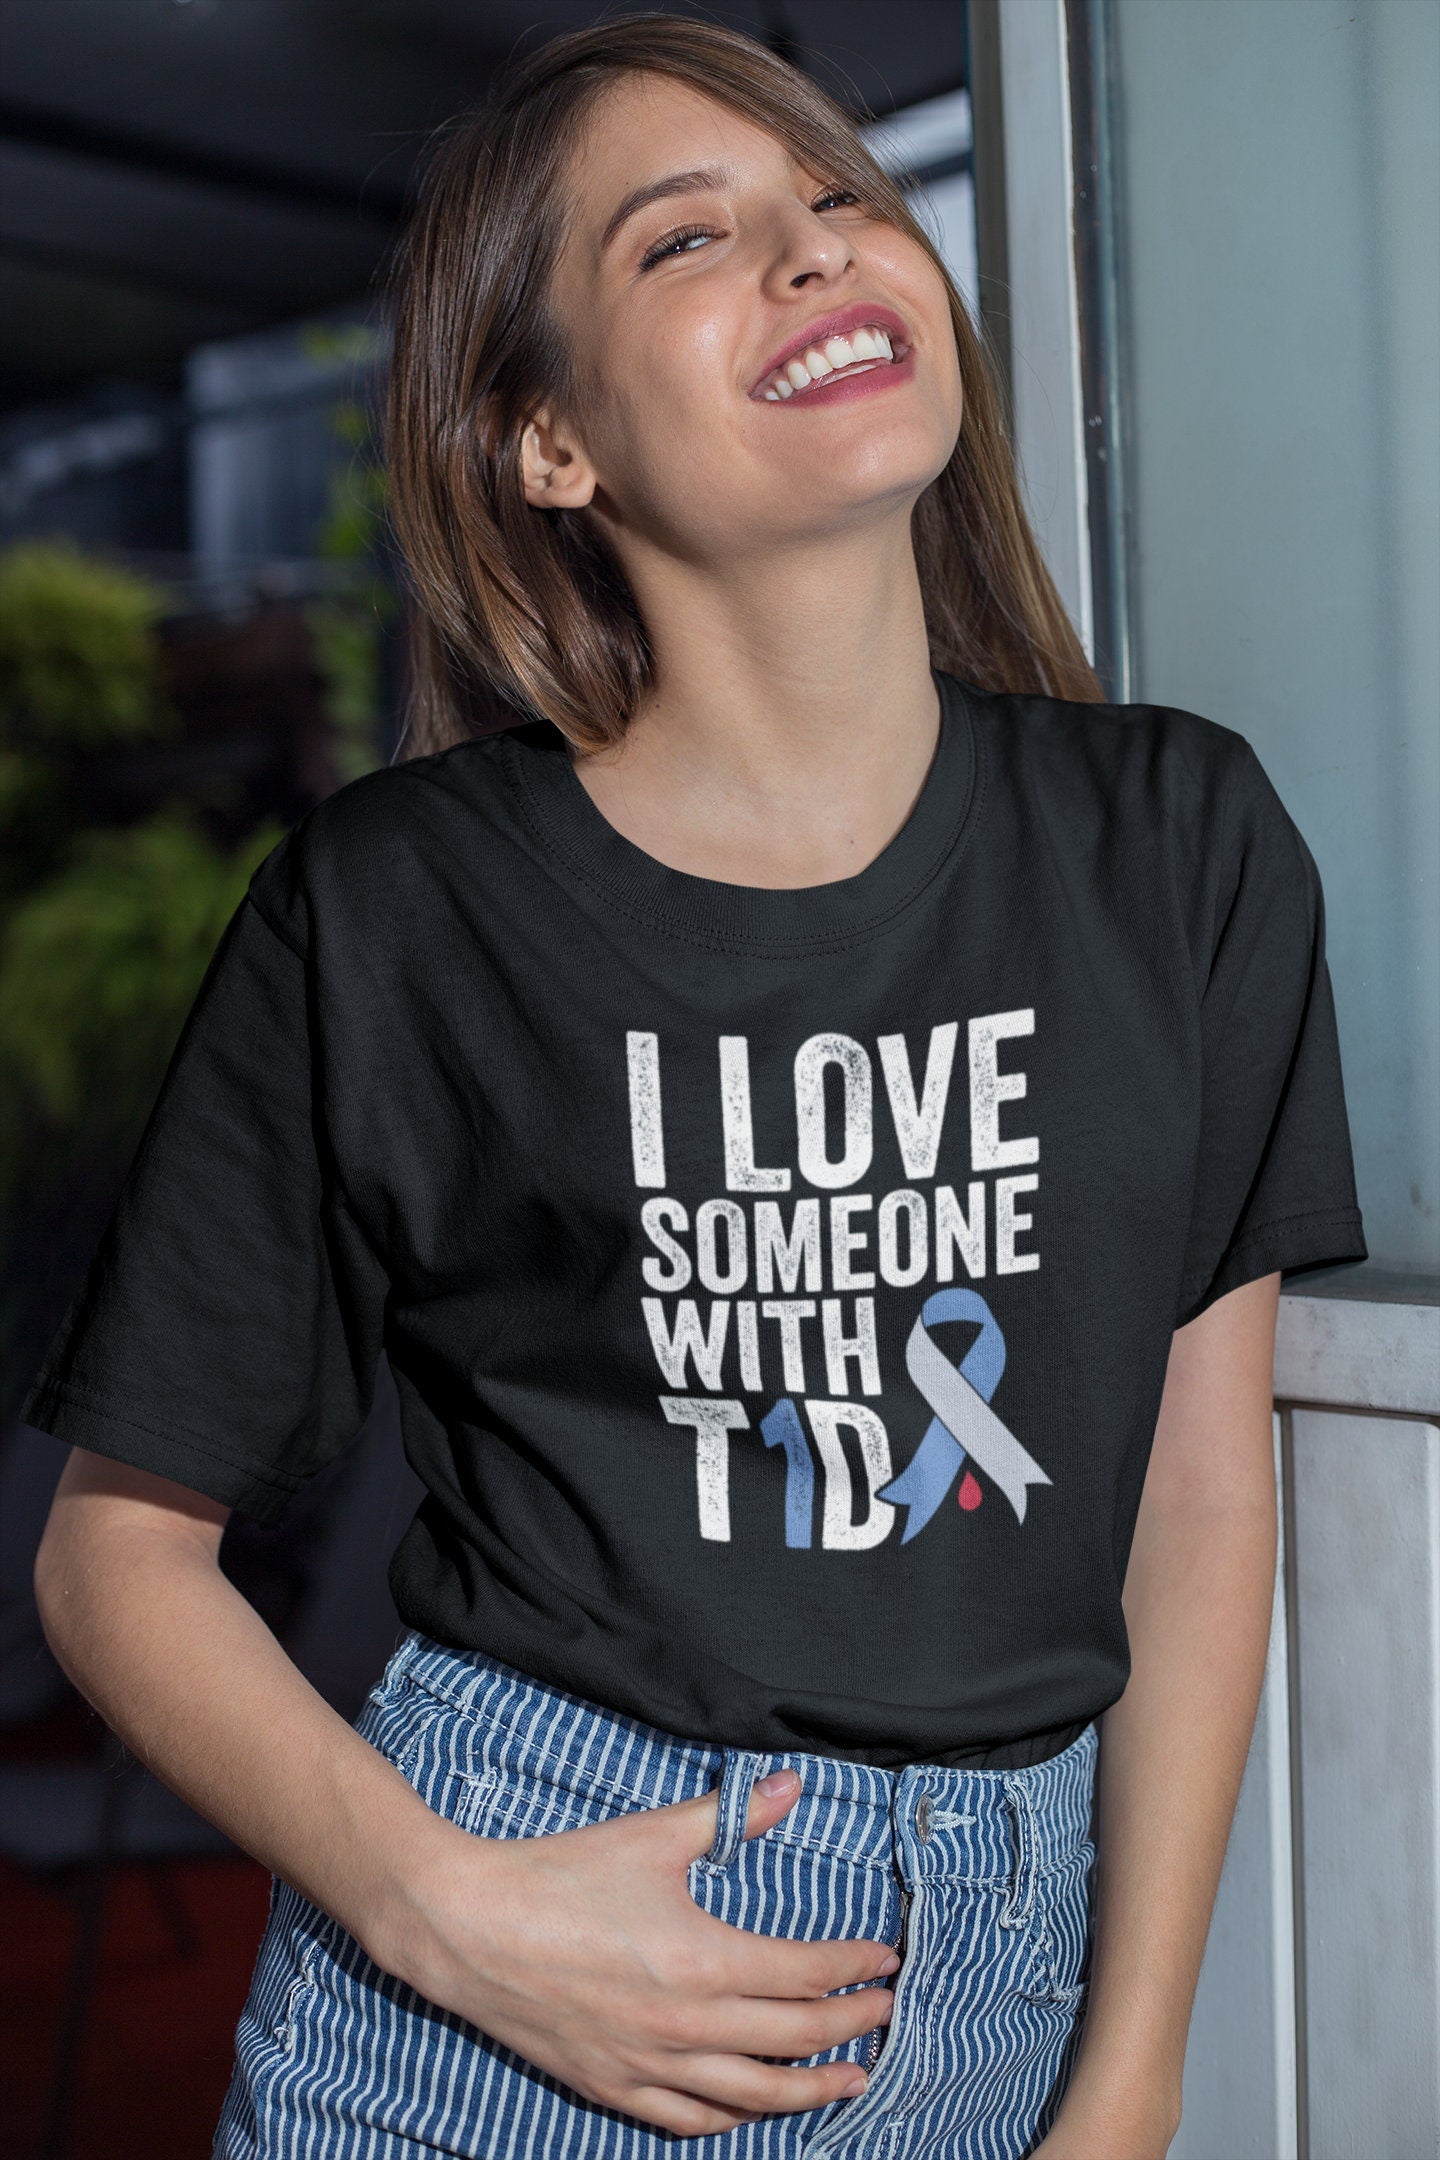 I love someone with T1D Shirt, Type 1 Diabetes Shirt, T1D Hope Ribbon, Gift For Diabetic, Diabetes Warrior